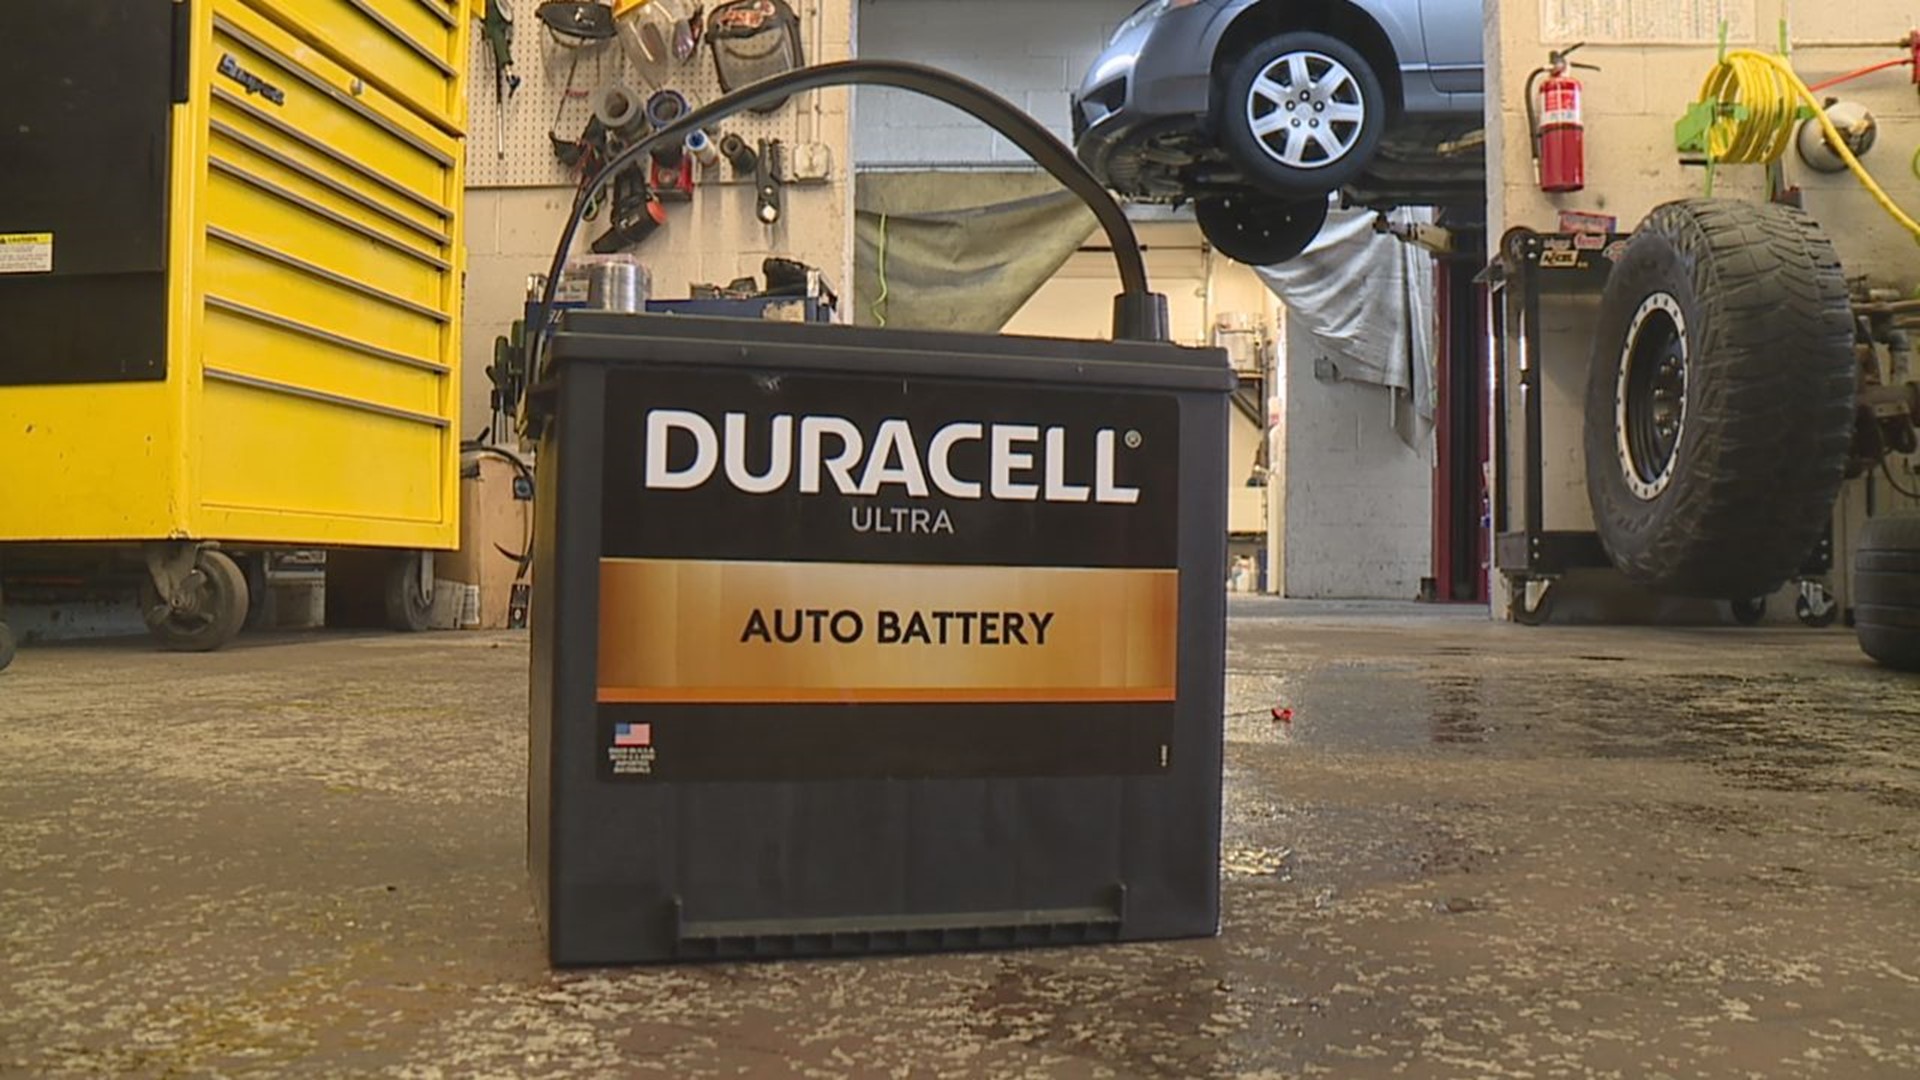 Experts say keeping an eye on your car’s battery can make a major difference in keeping it running safely in the cold.